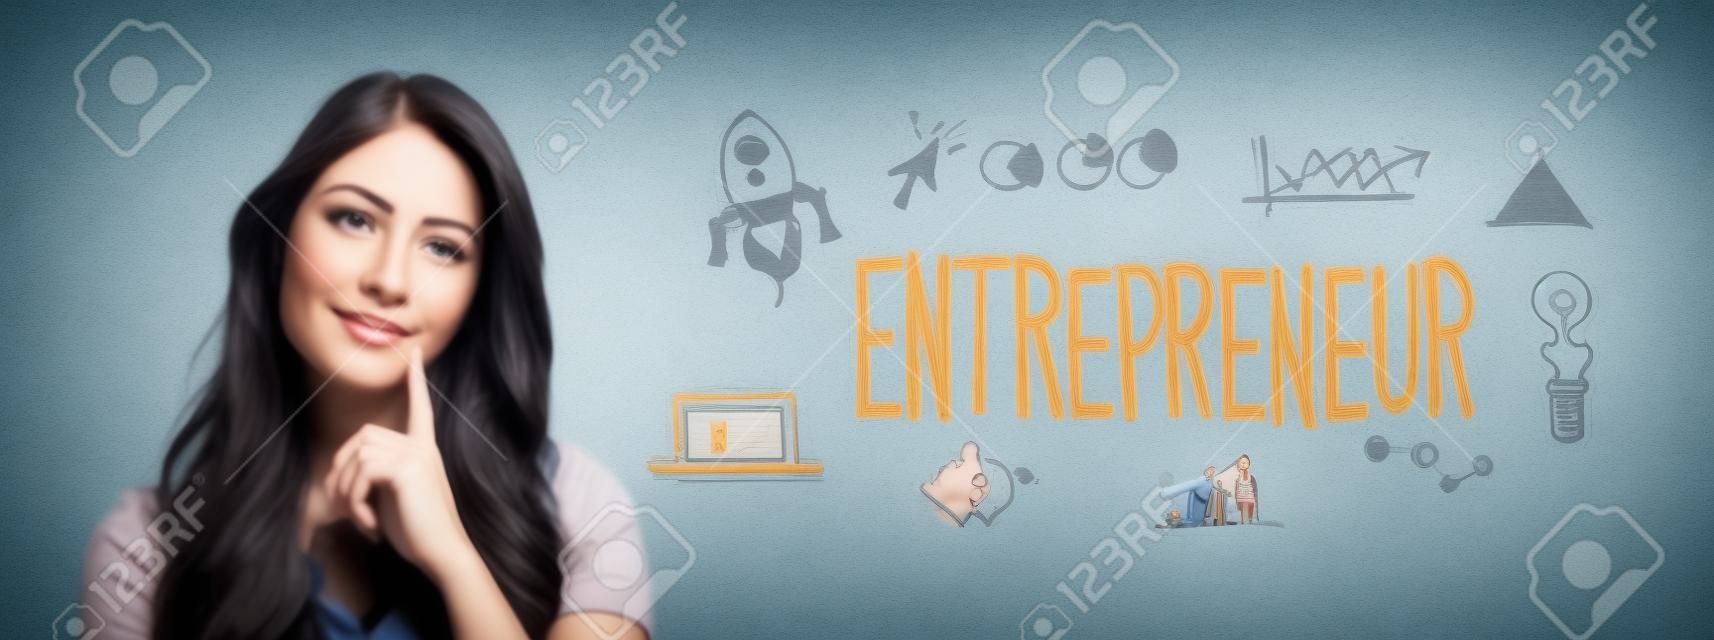 Entrepreneur with young woman in a thoughtful fac